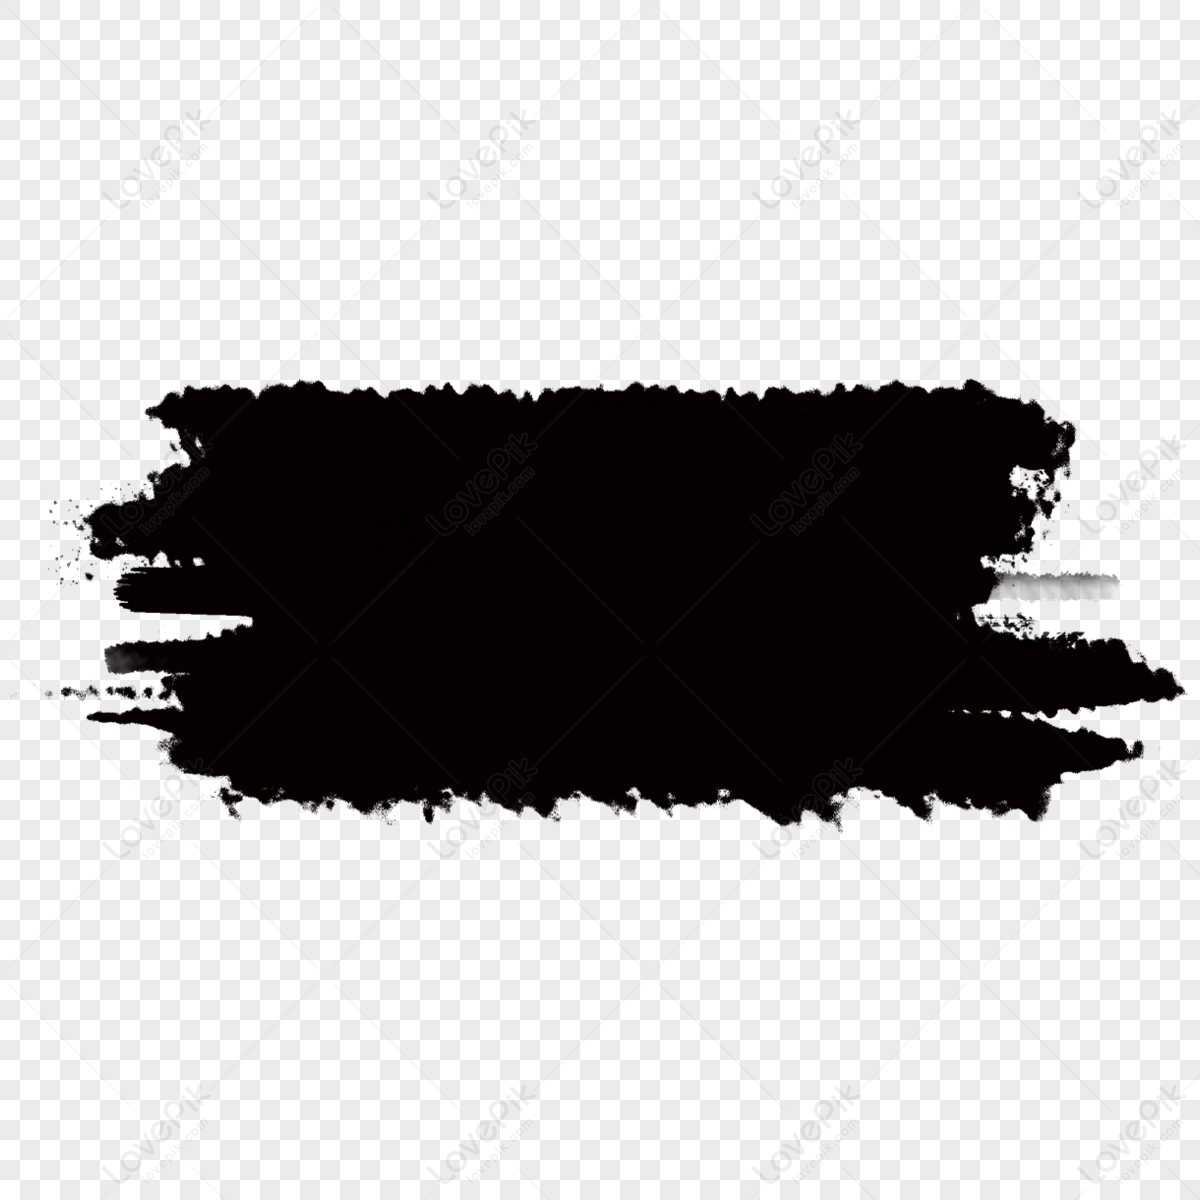 Luxury Brush Stroke PNG Transparent Images Free Download, Vector Files